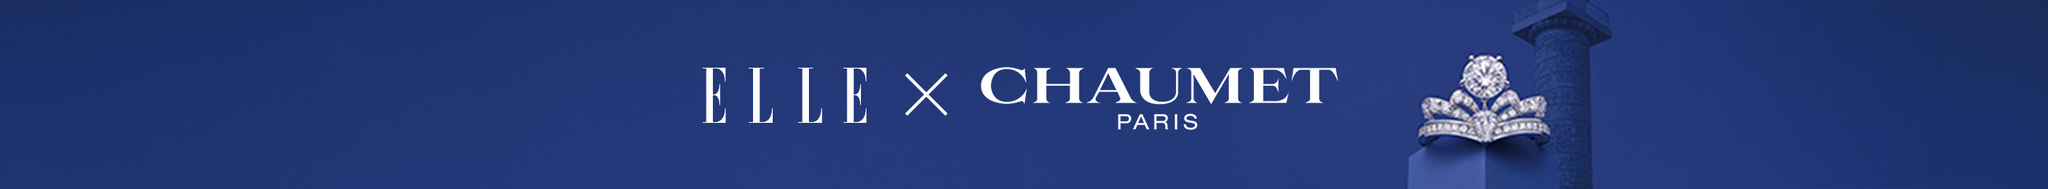 【brand know how】chaumet